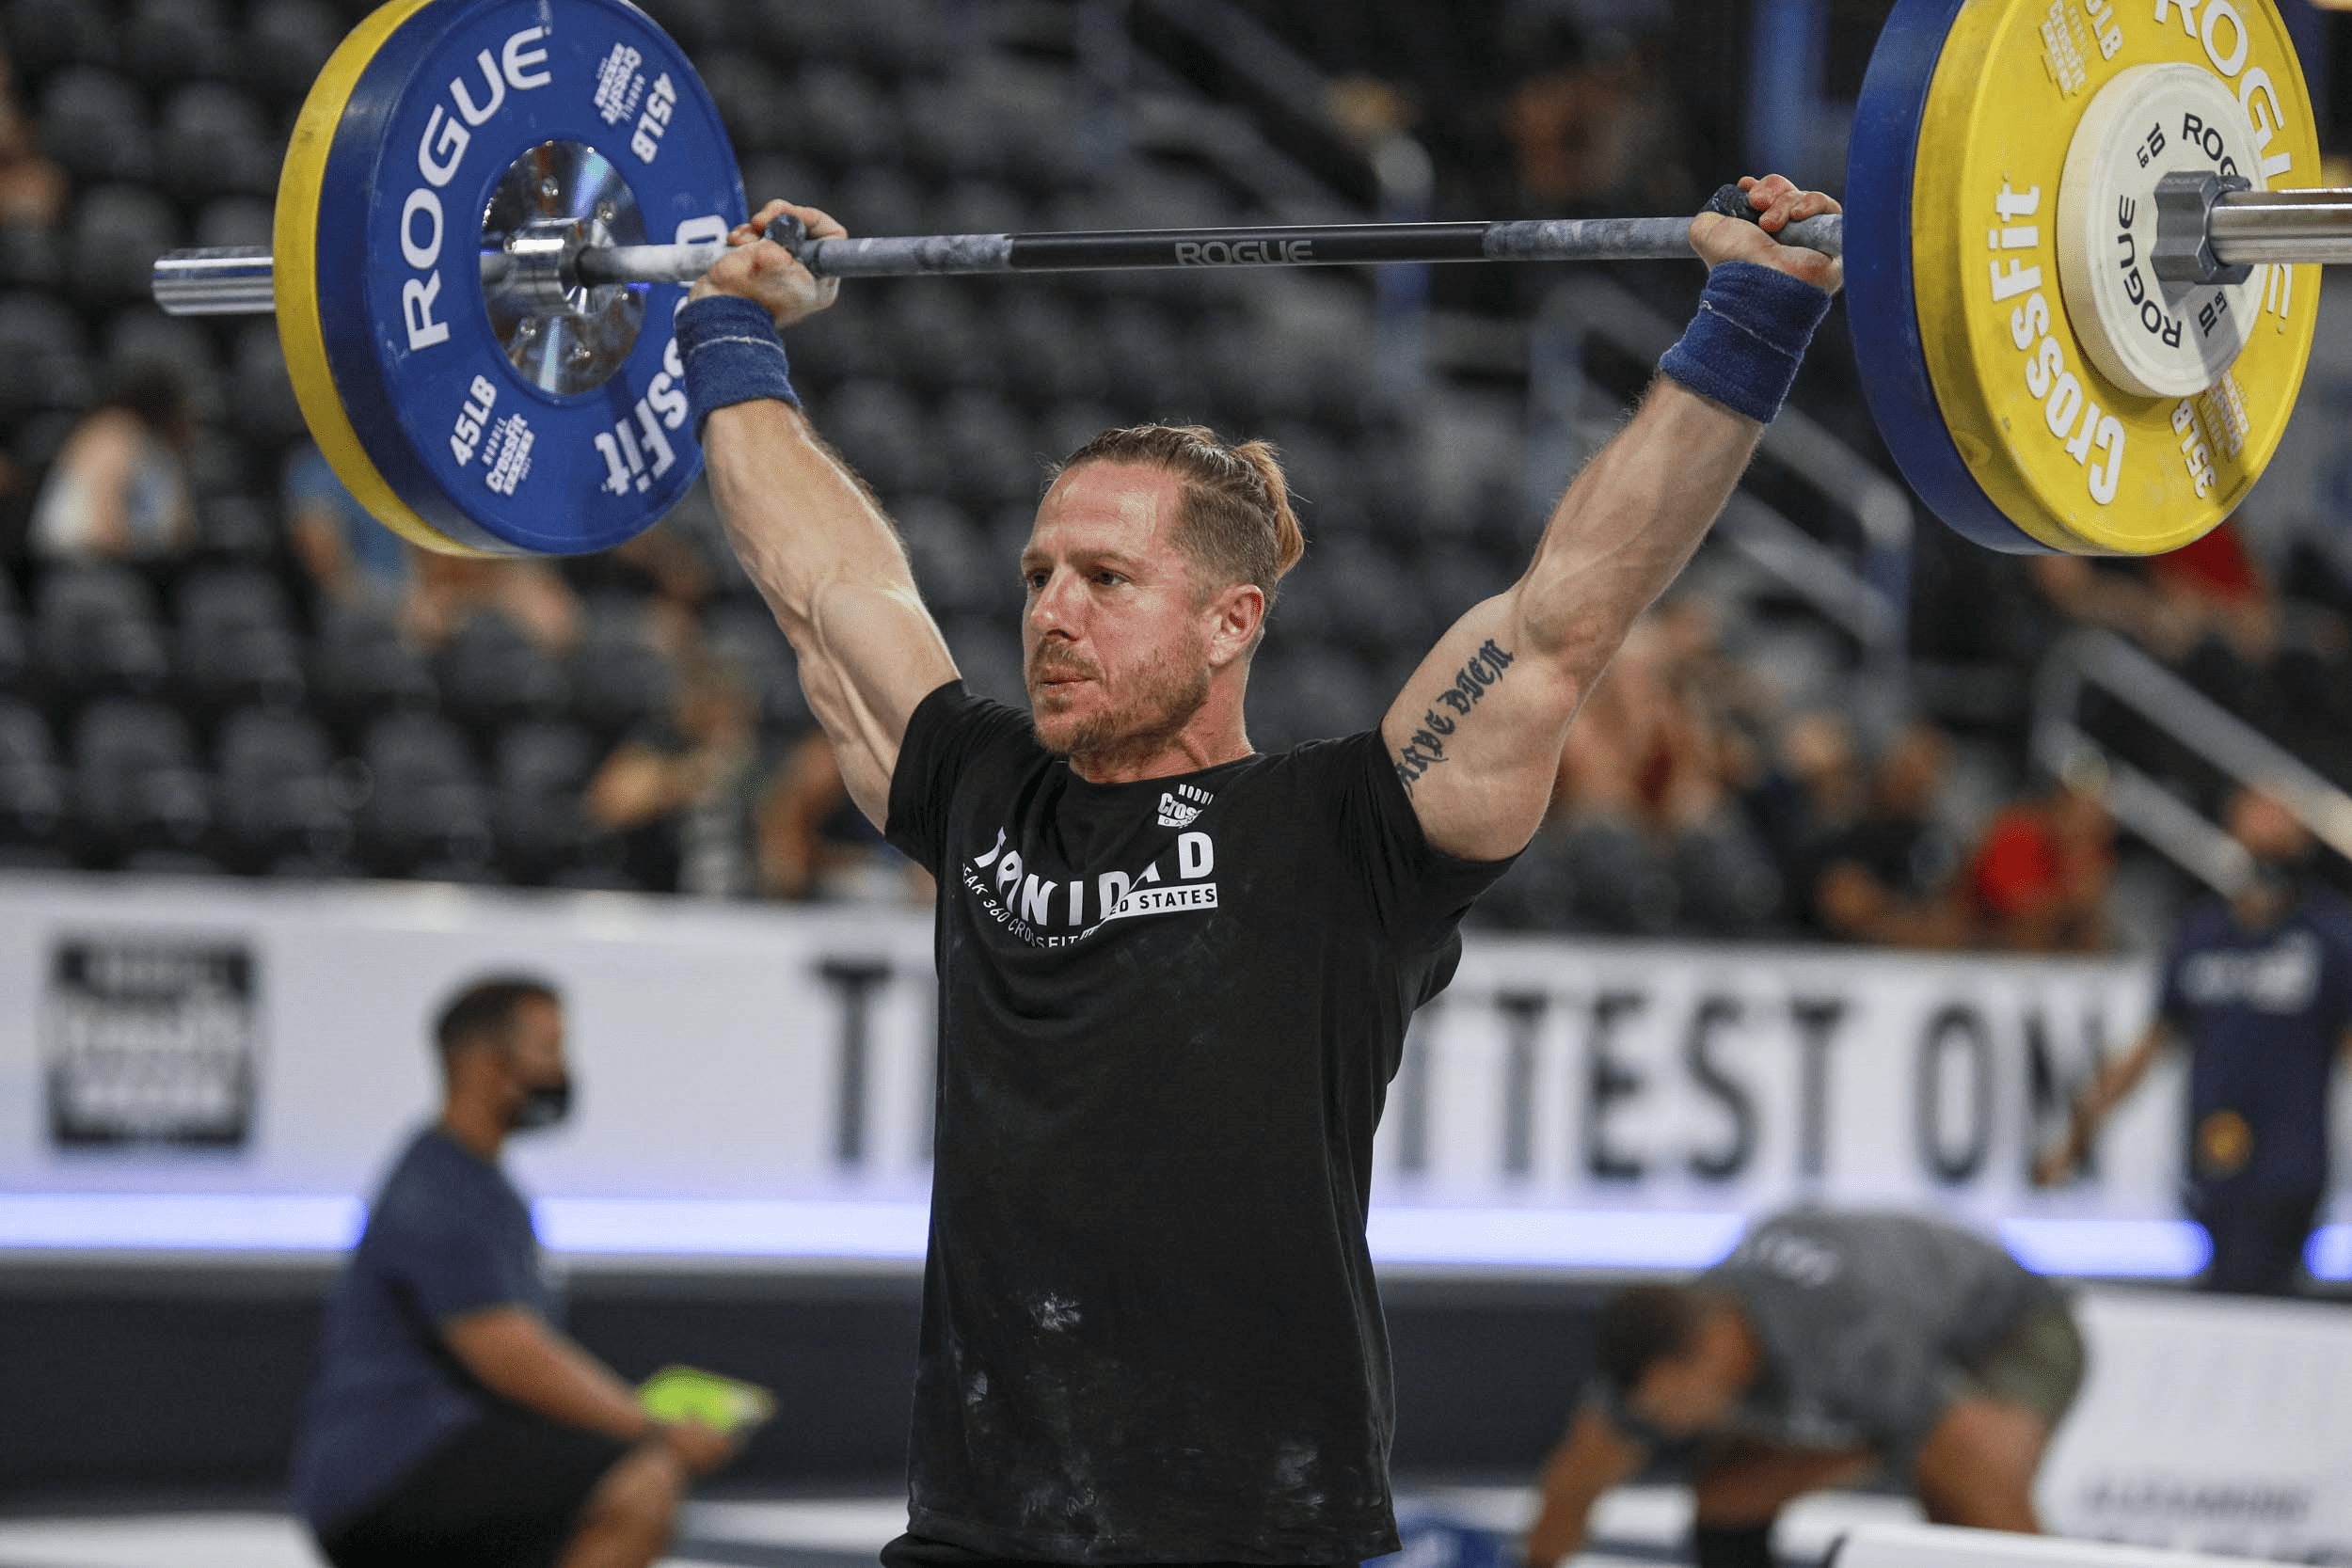 master athlete competing in crossfit